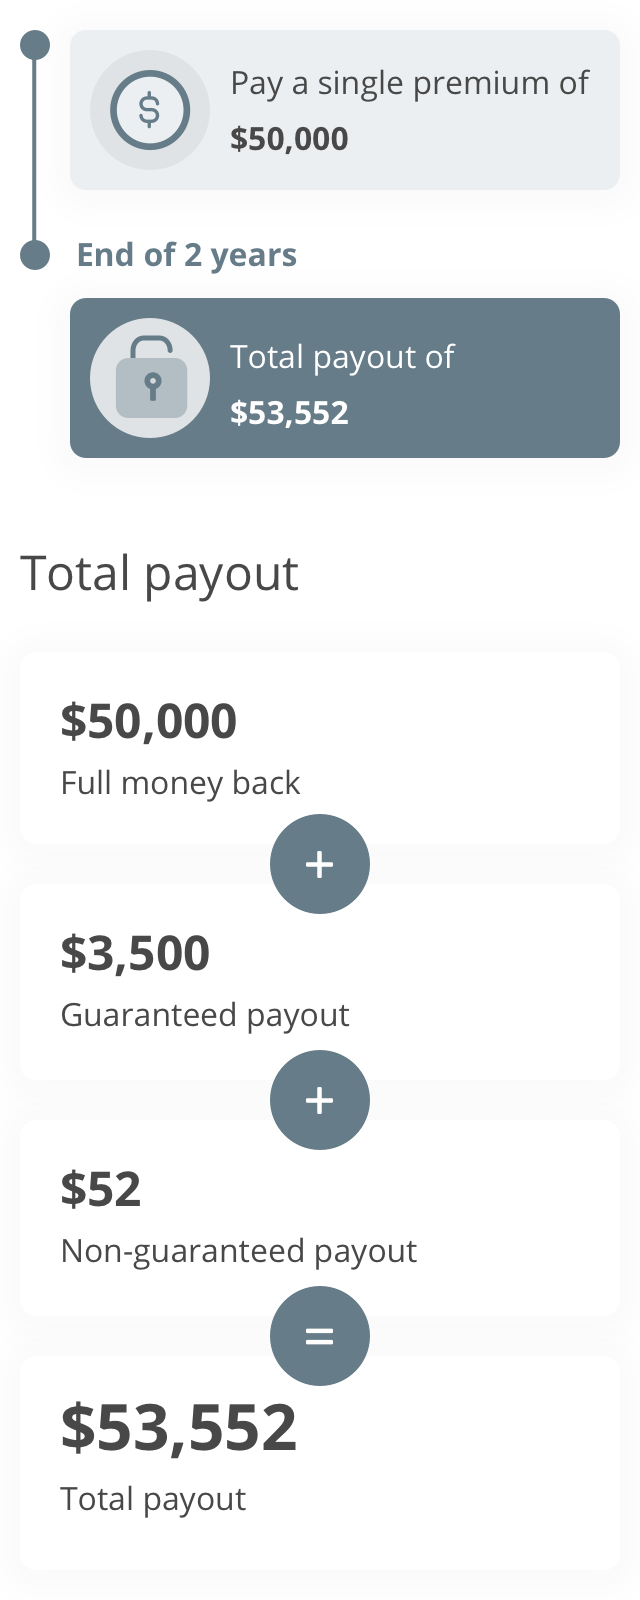 Total illustrated payout upon maturity